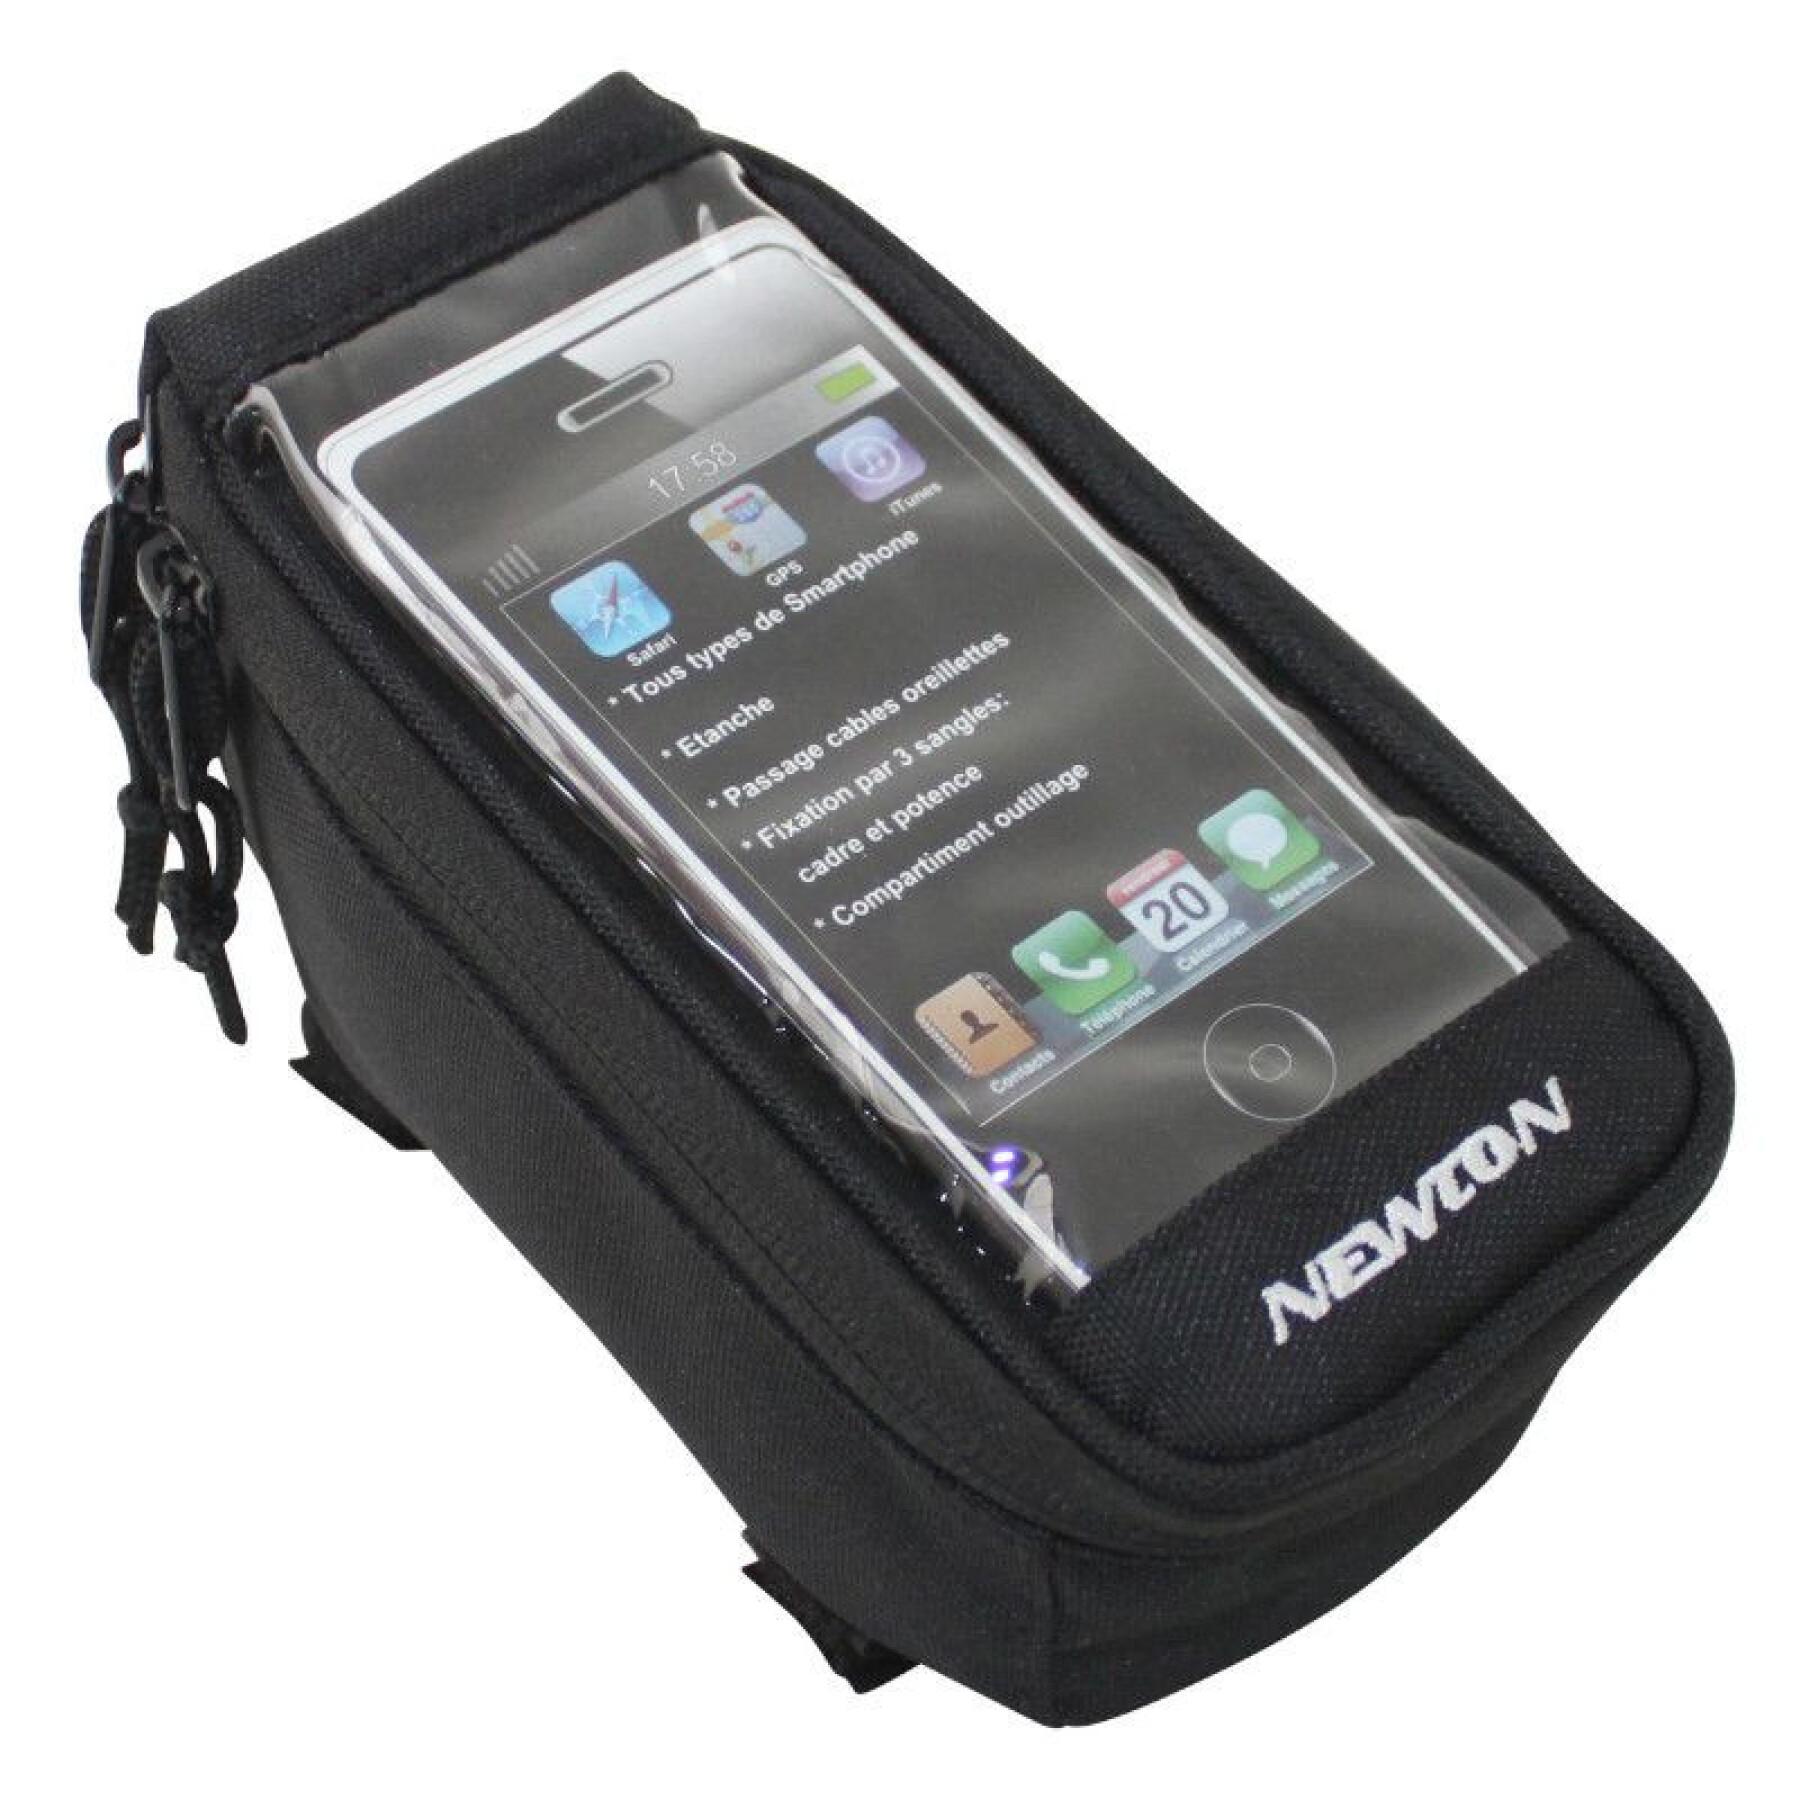 Bike frame bag-potential smartphone for cell phone - i-phone velcro attachment P2R 17 x 9 x 7 cm